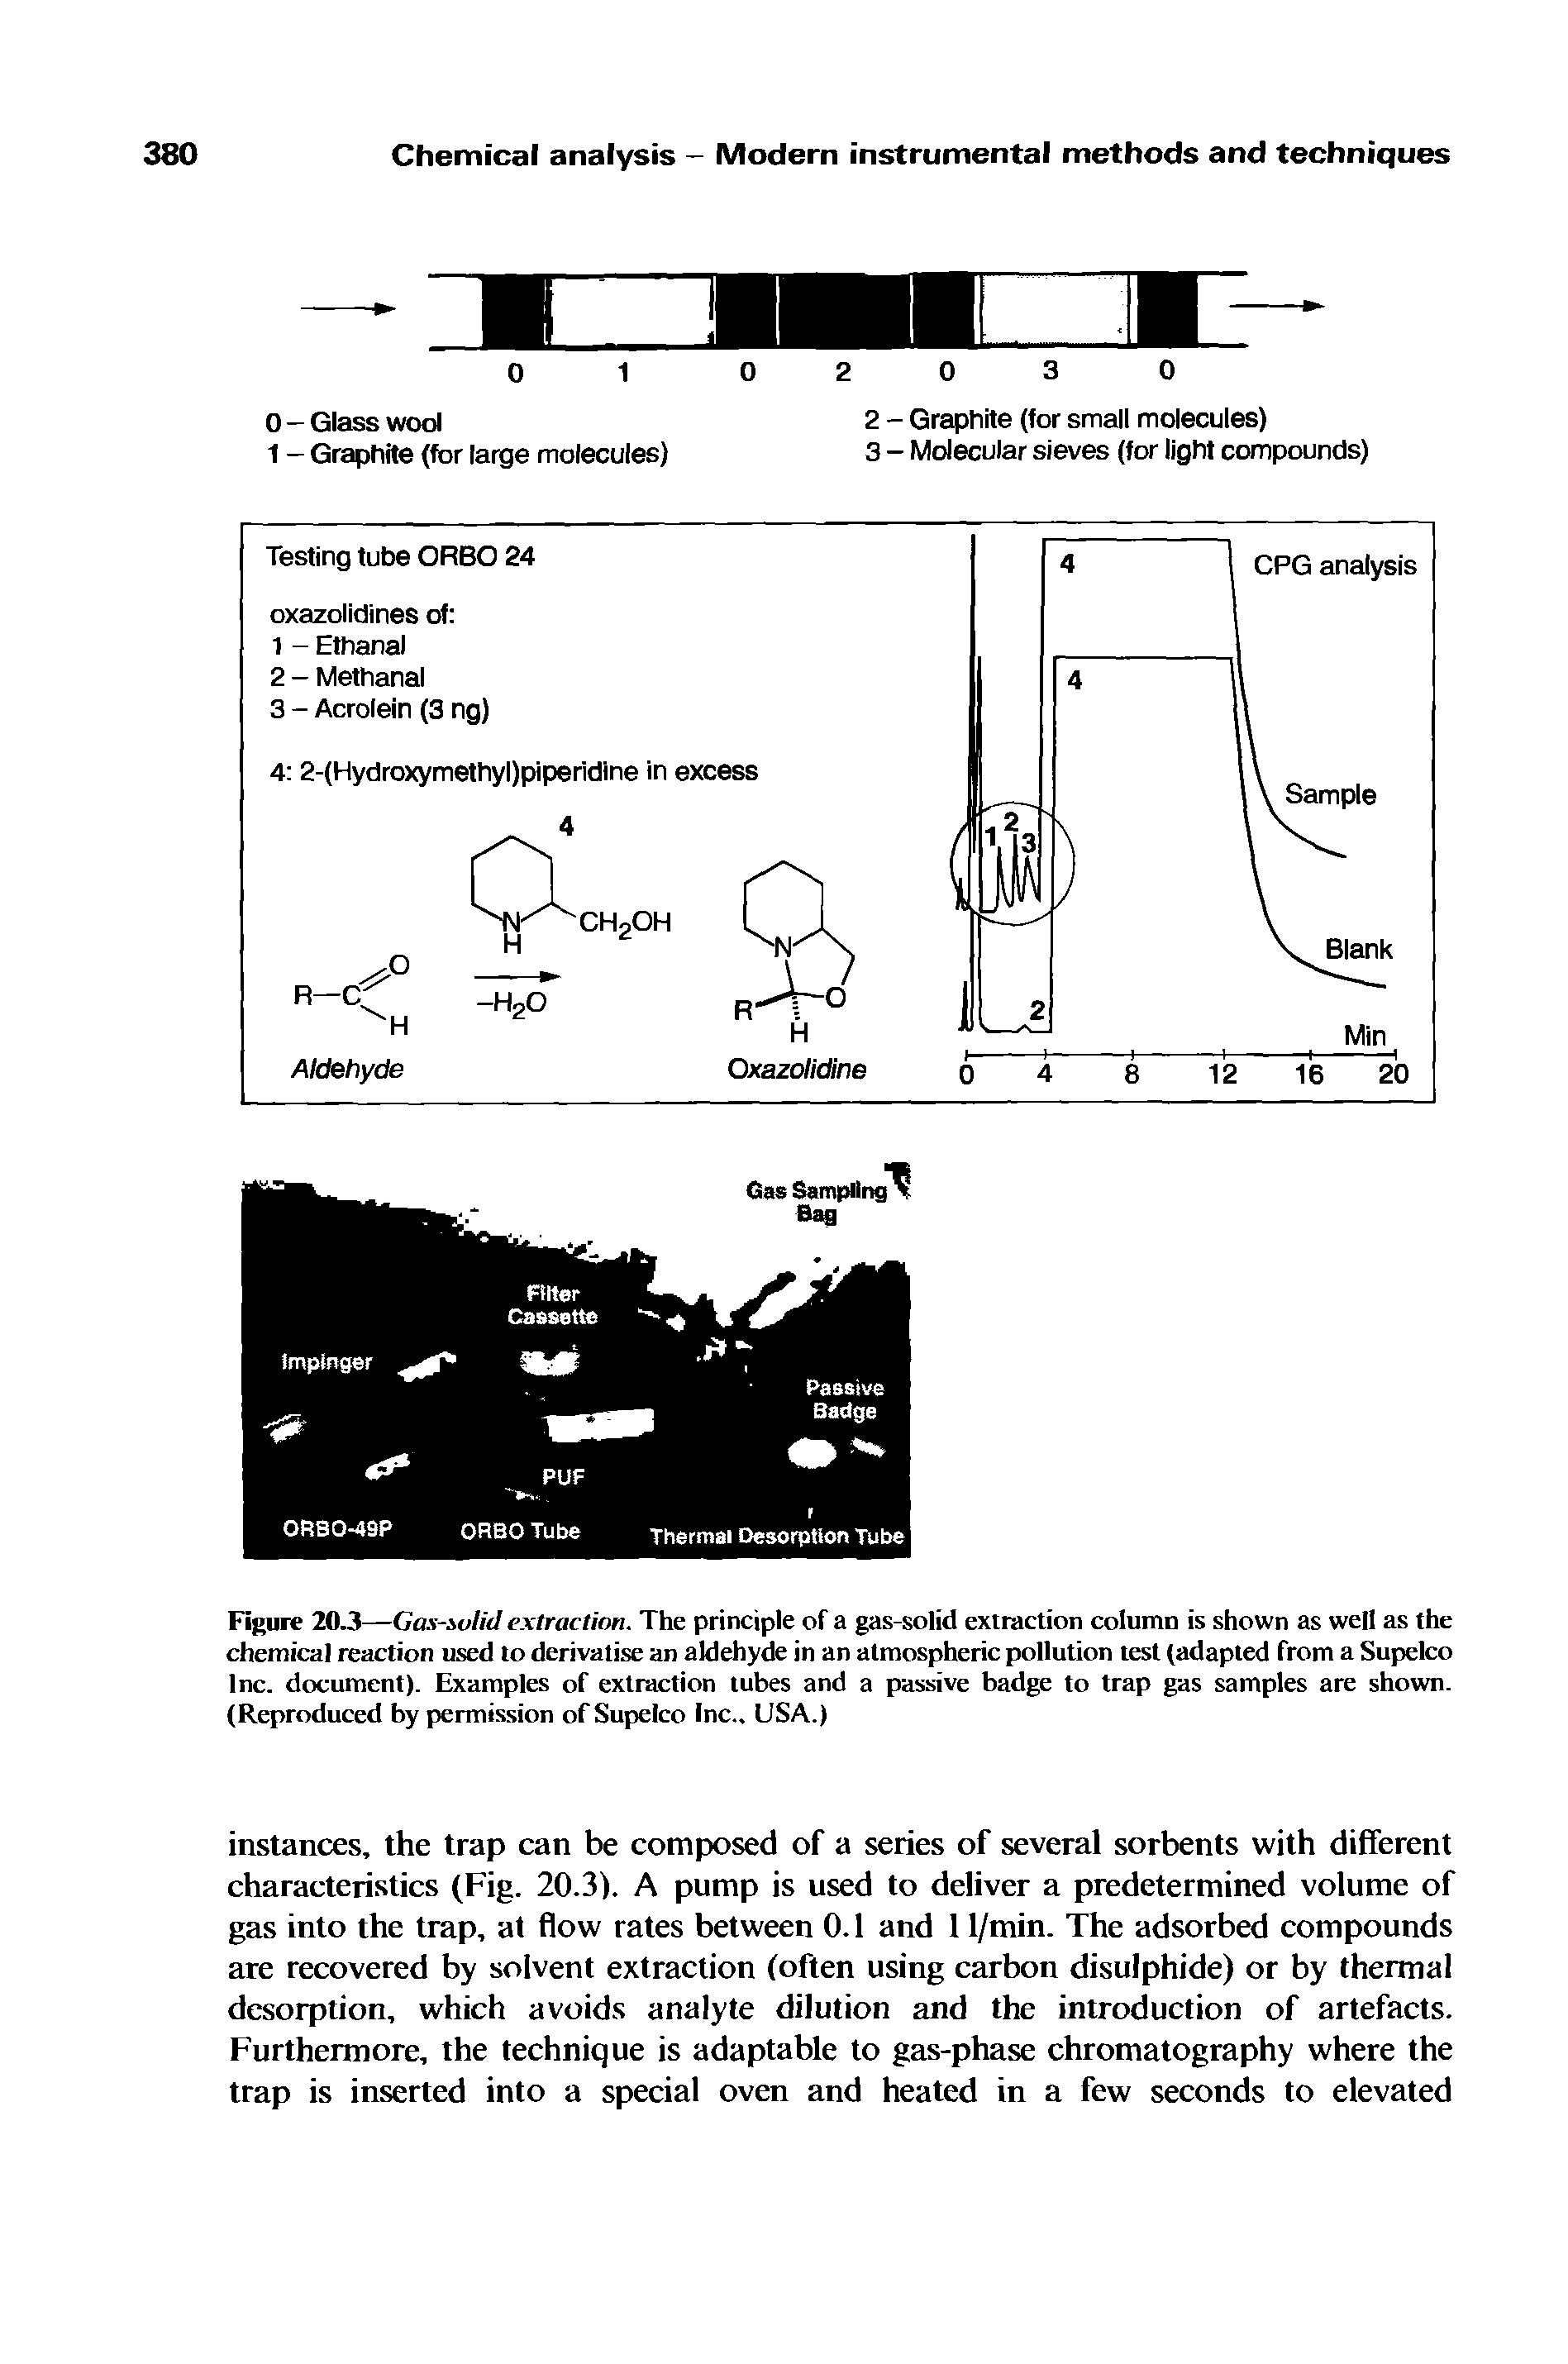 Figure 20.3—Gas-svlid extraction. The principle of a gas-solid extraction column is shown as well as the chemical reaction used to derivatise an aldehyde in an atmospheric pollution test (adapted from a Supelco Inc. document). Examples of extraction tubes and a passive badge to trap gas samples are shown. (Reproduced by permission of Supelco Inc.. USA.)...